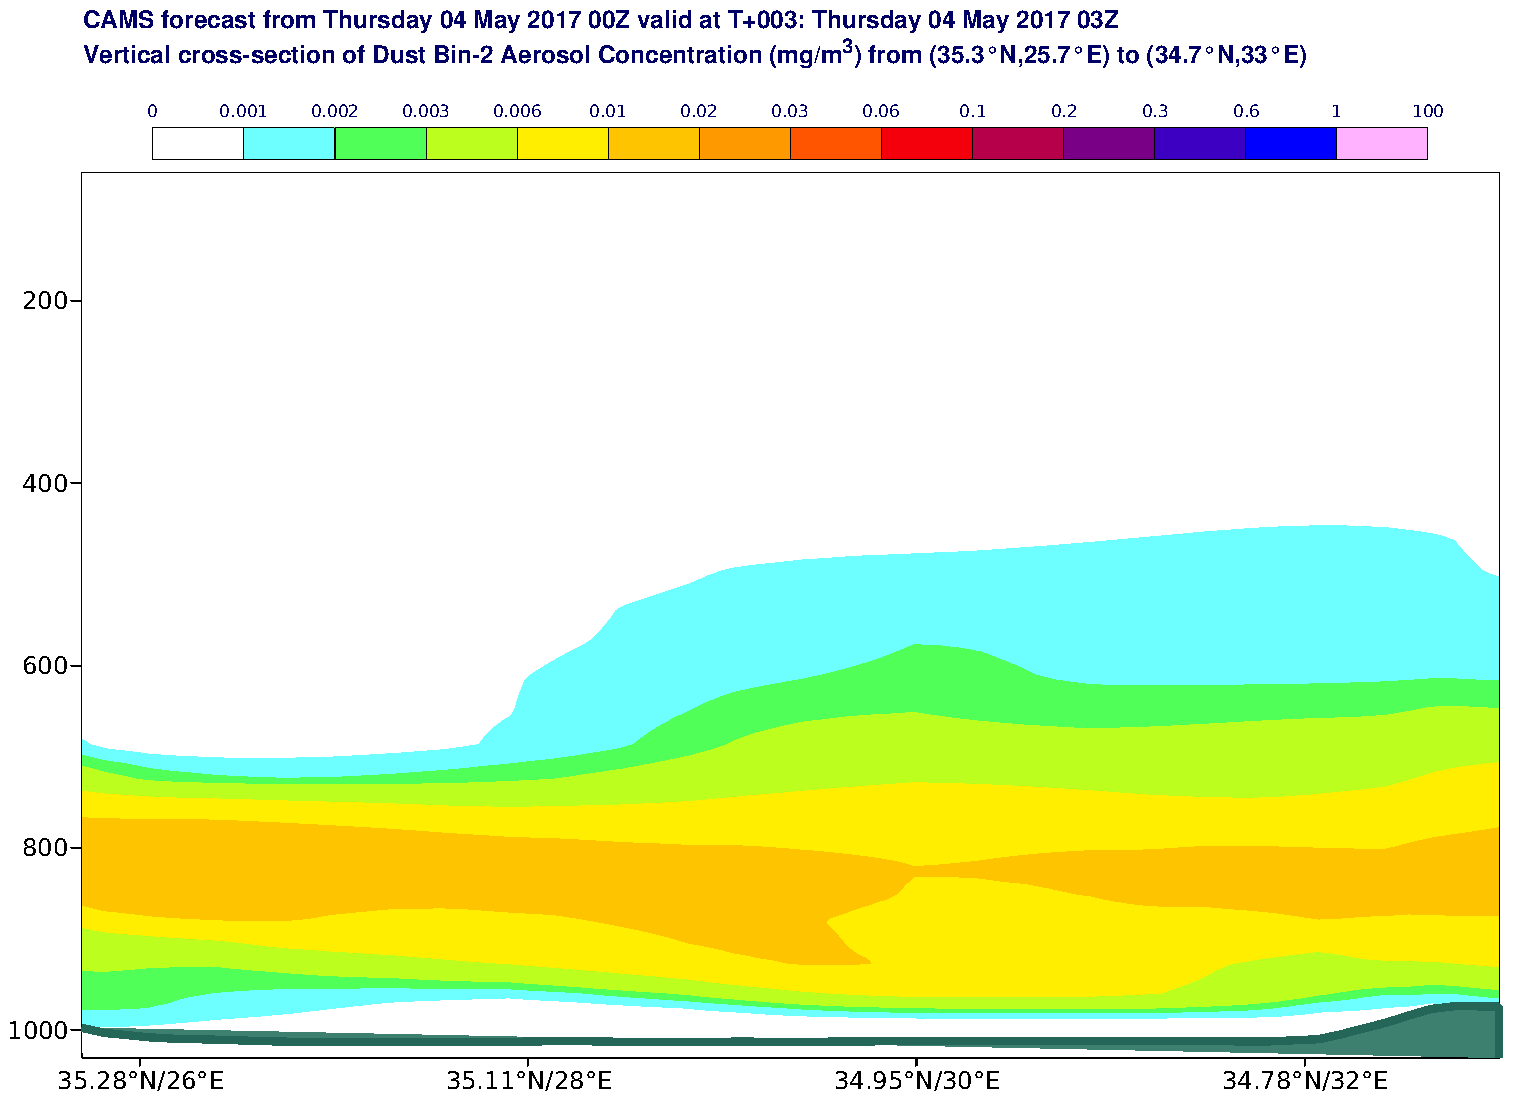 Vertical cross-section of Dust Bin-2 Aerosol Concentration (mg/m3) valid at T3 - 2017-05-04 03:00